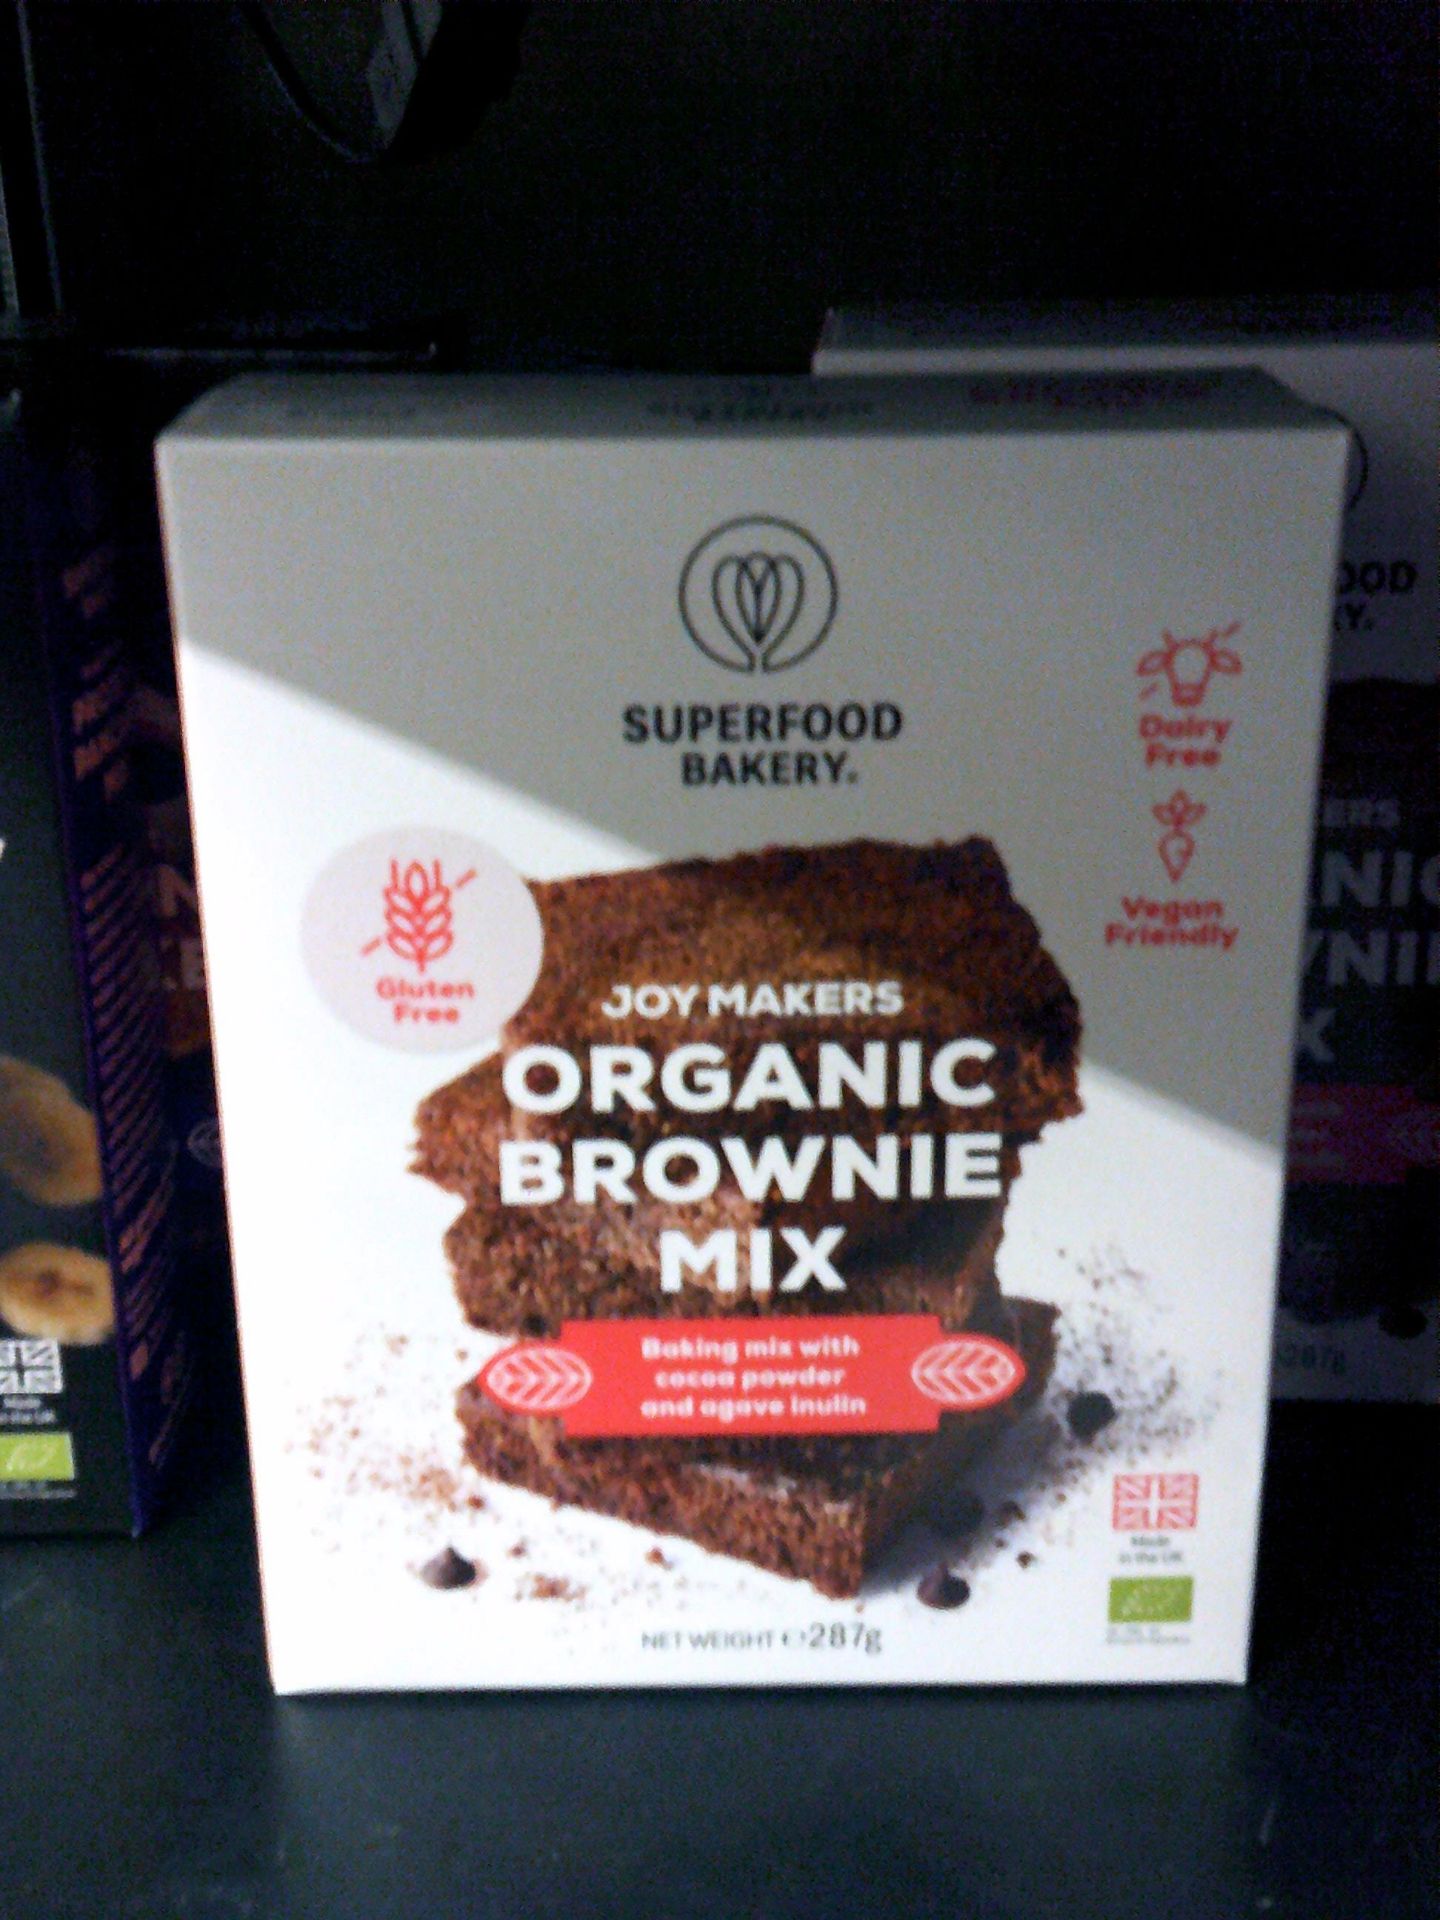 superfood bakery selection x 8 boxes. 2 x Pancake mix, 2 x brownie mix, 2 x choc cookie mix, 2 x - Image 3 of 5